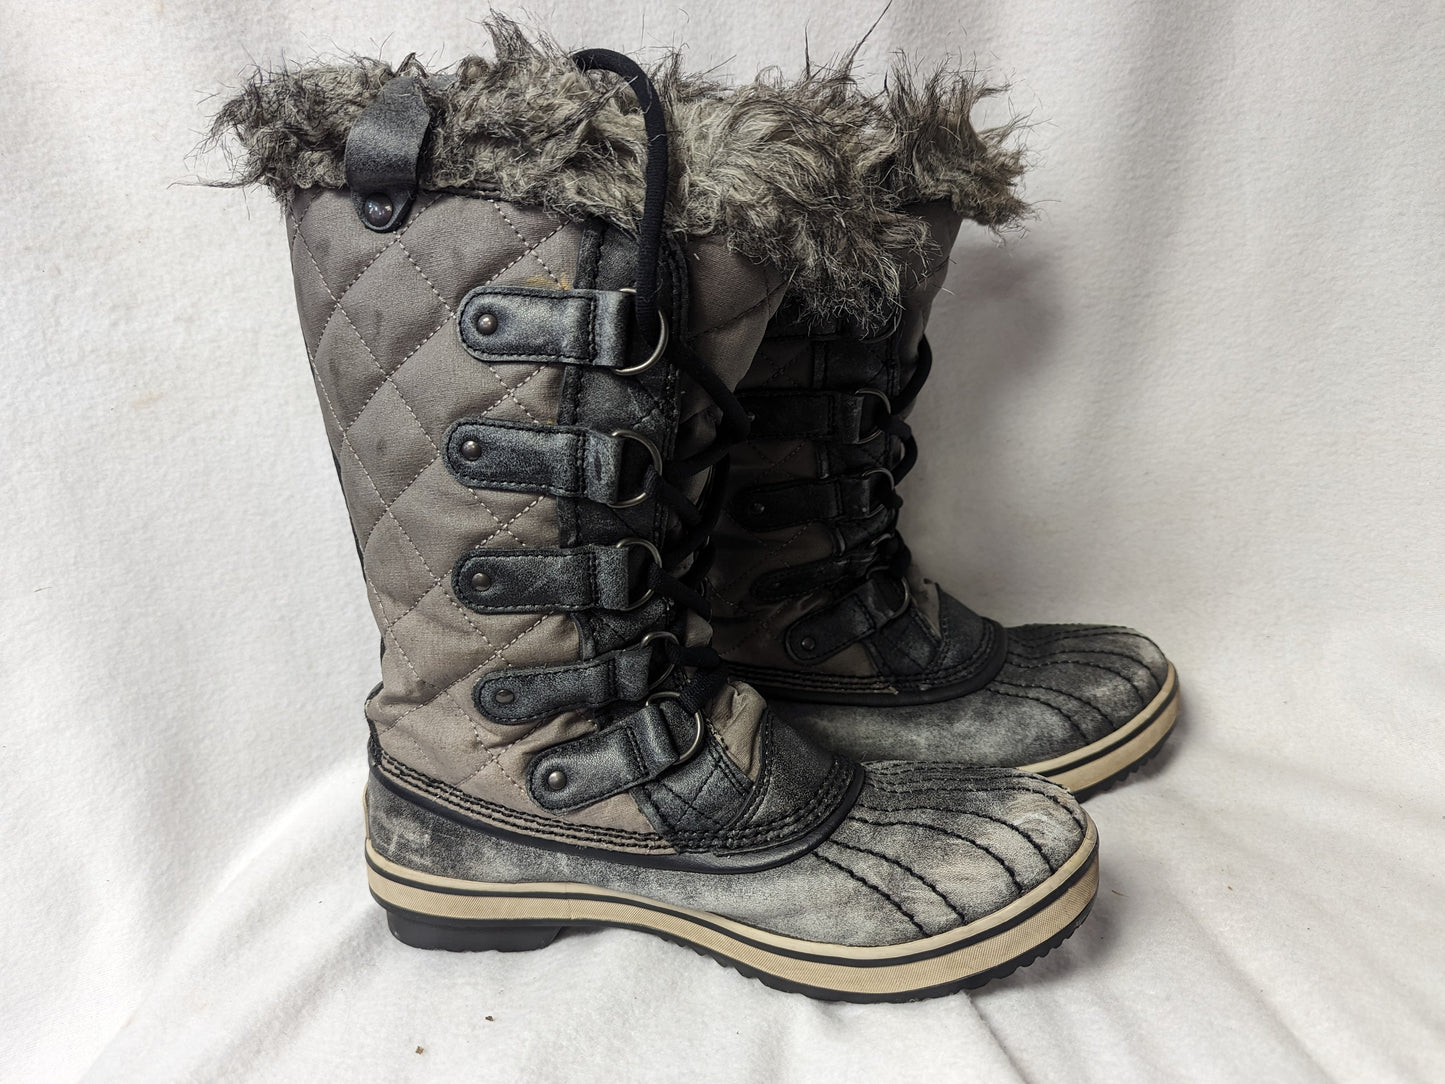 Sorel Insulated Winter Waterproof Snow Boots Size 7 Color Gray Condition Used